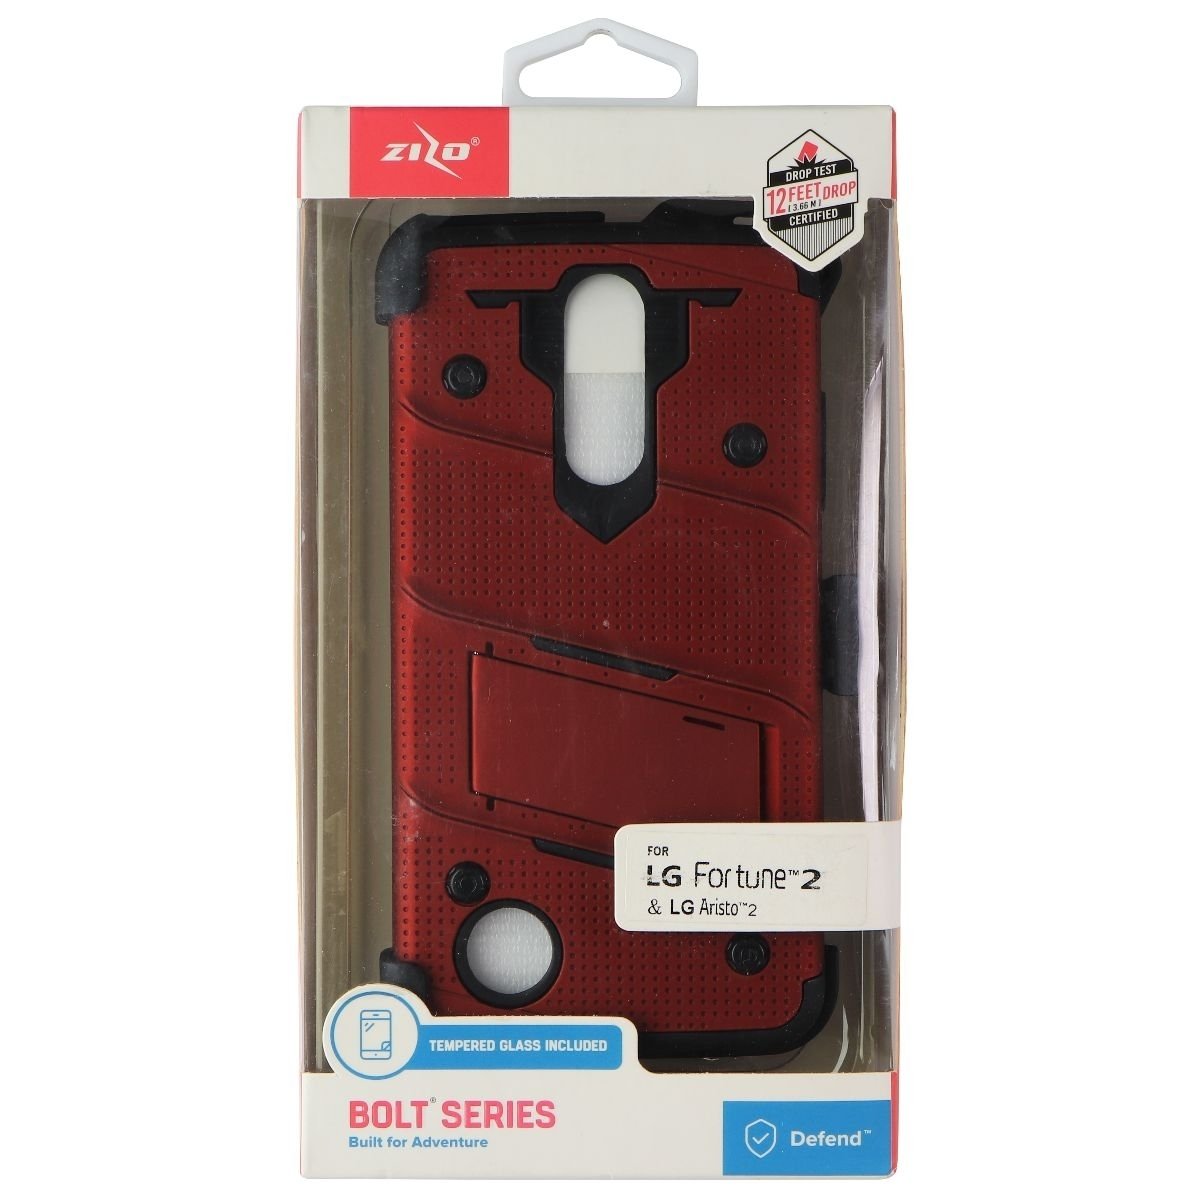 Zizo Bolt Series Case And Holster For LG Fortune 2 / Aristo 2 - Red (Refurbished)